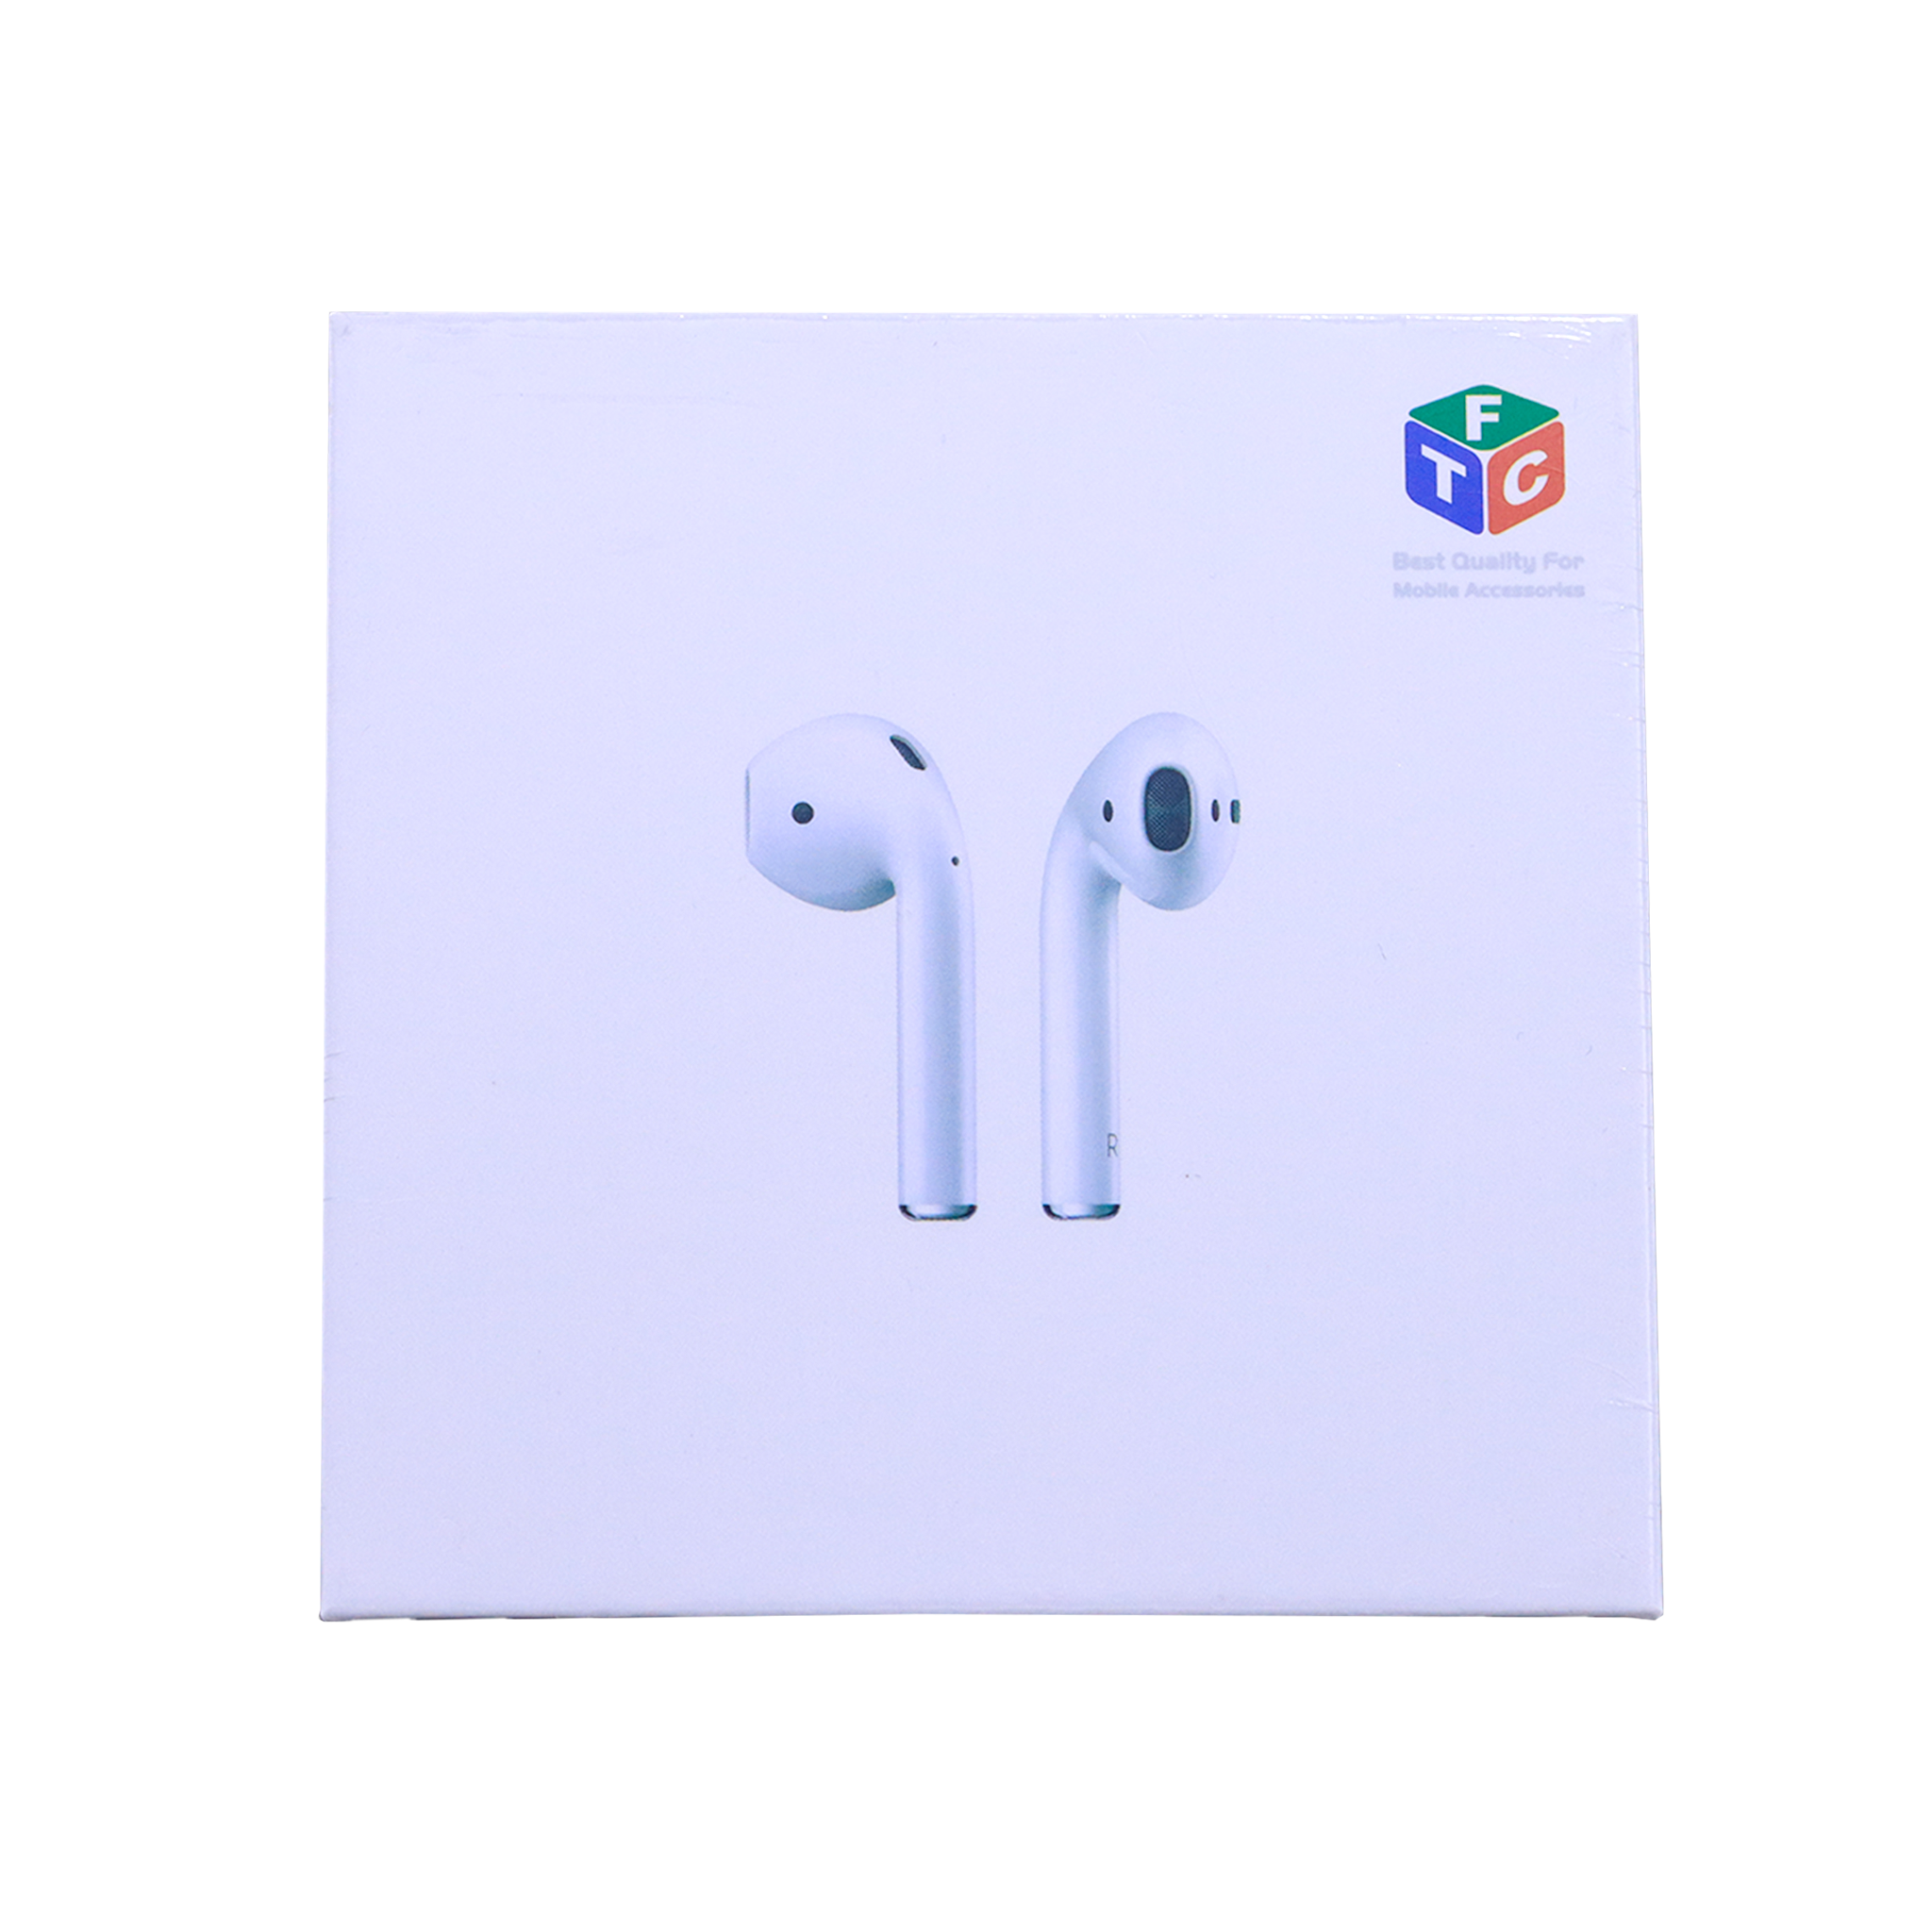 FTC Airpods 2